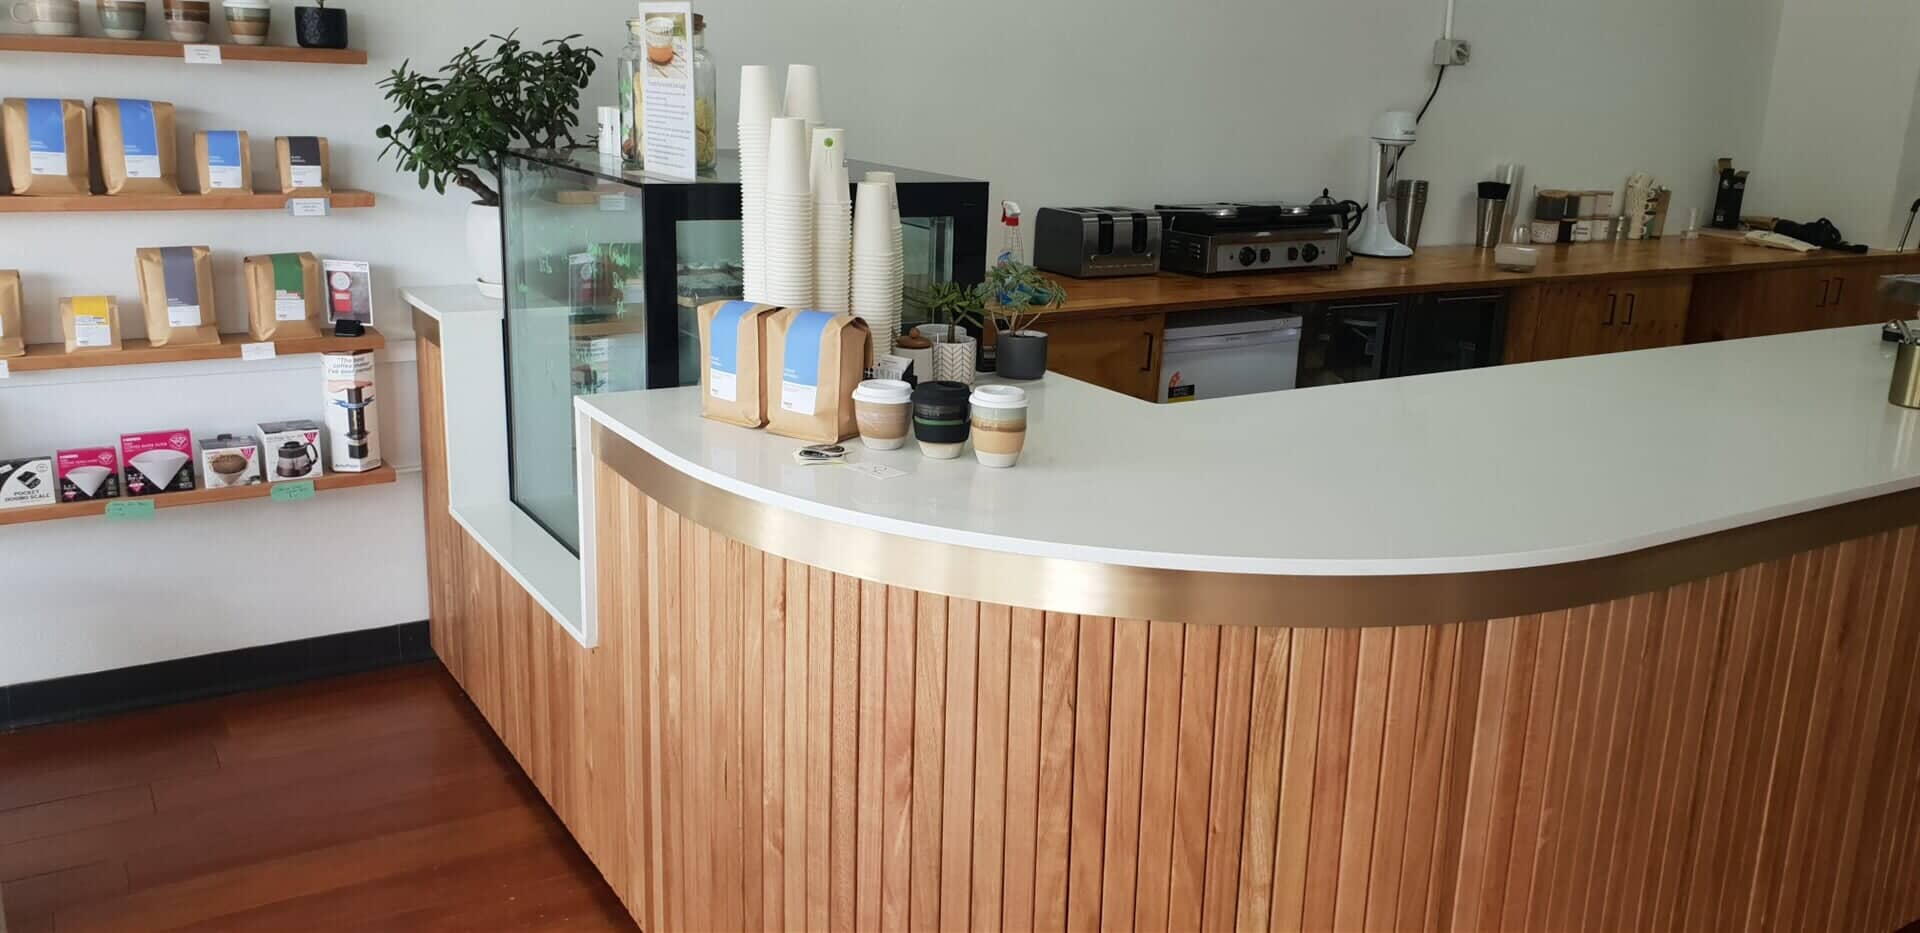 20mm Stone Benchtops in Cafe — West Stone Benchtops in Orange, NSW